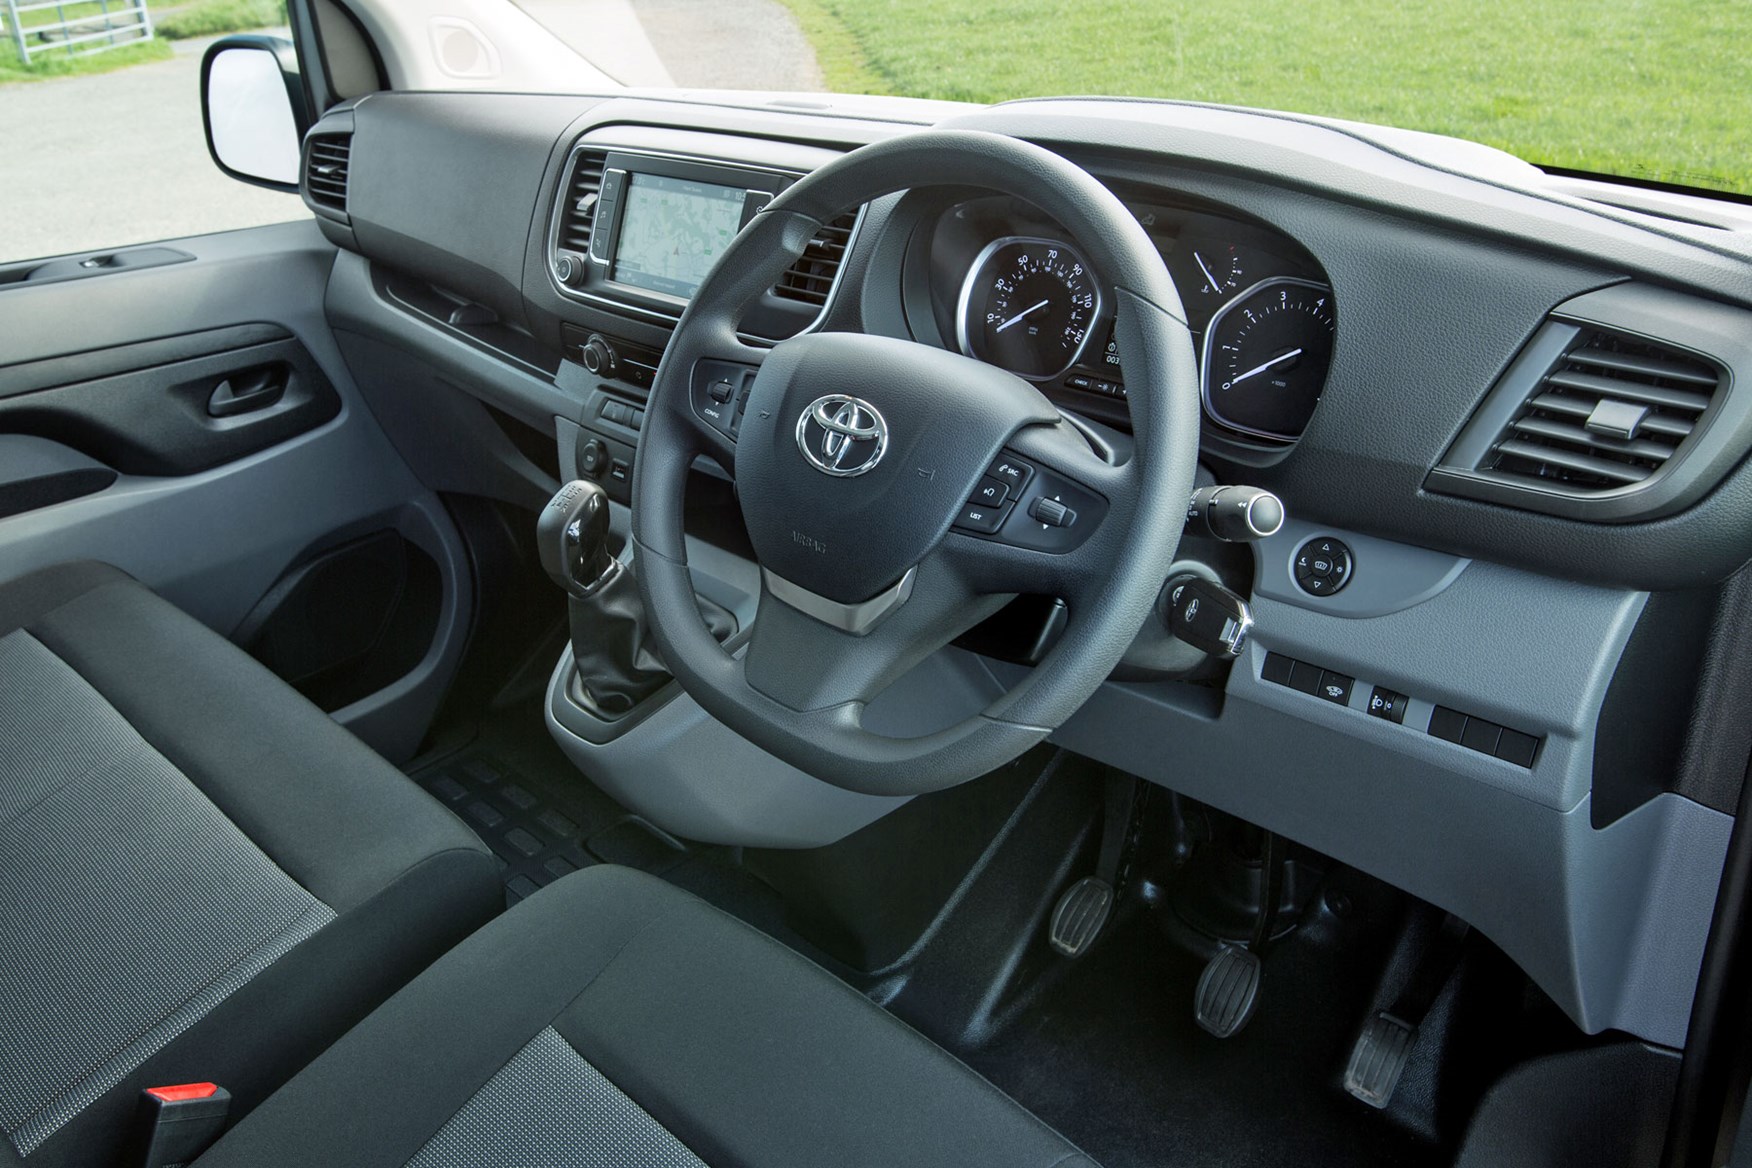 Toyota Proace review - cab interior showing whole dashboard from driver's side, 2018